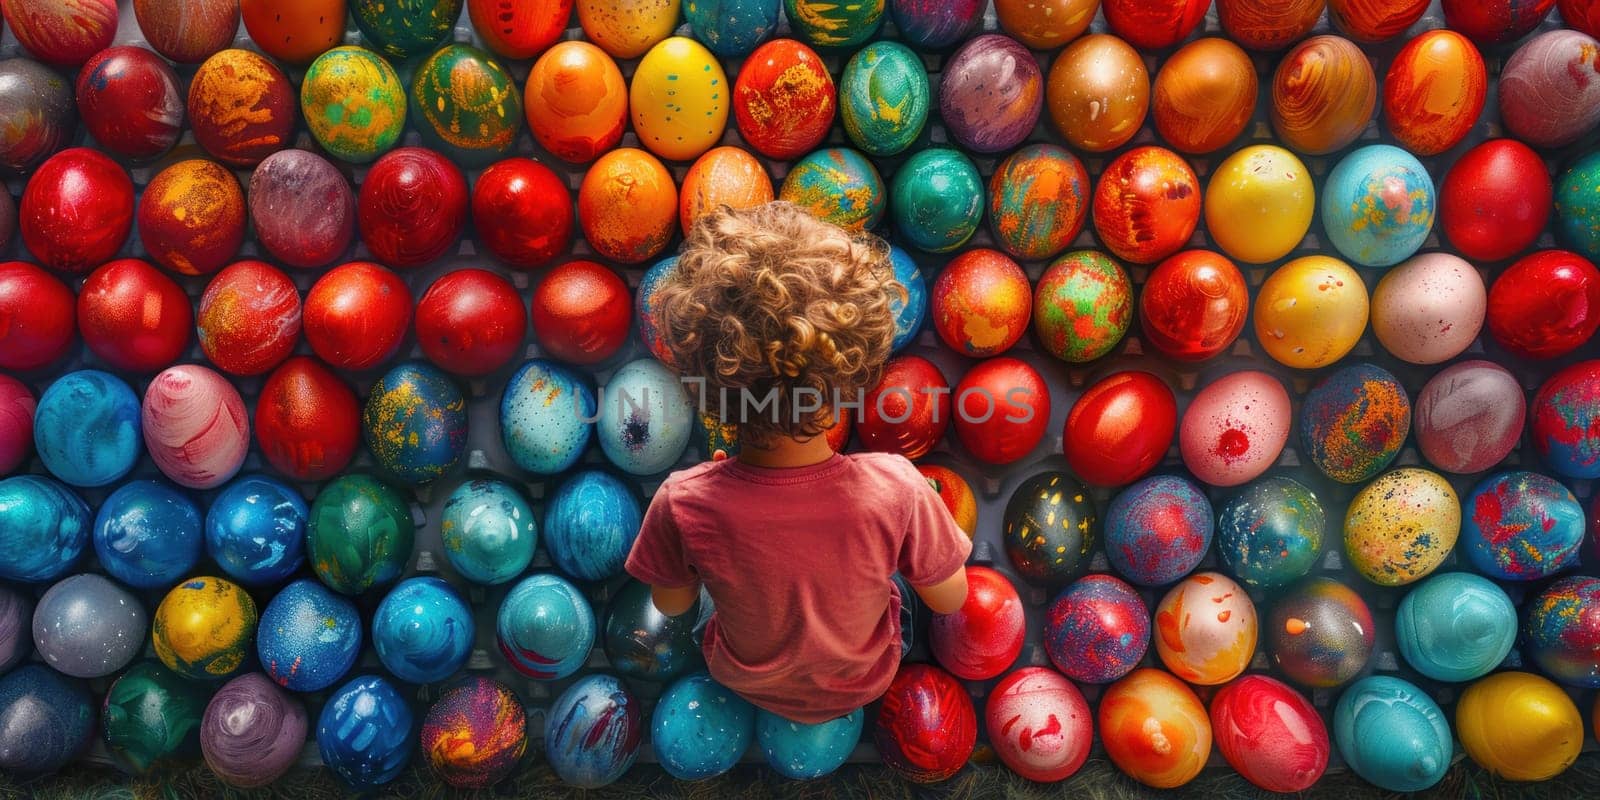 A child stands in front of a display of painted eggs, showcasing colorful designs for Easter.